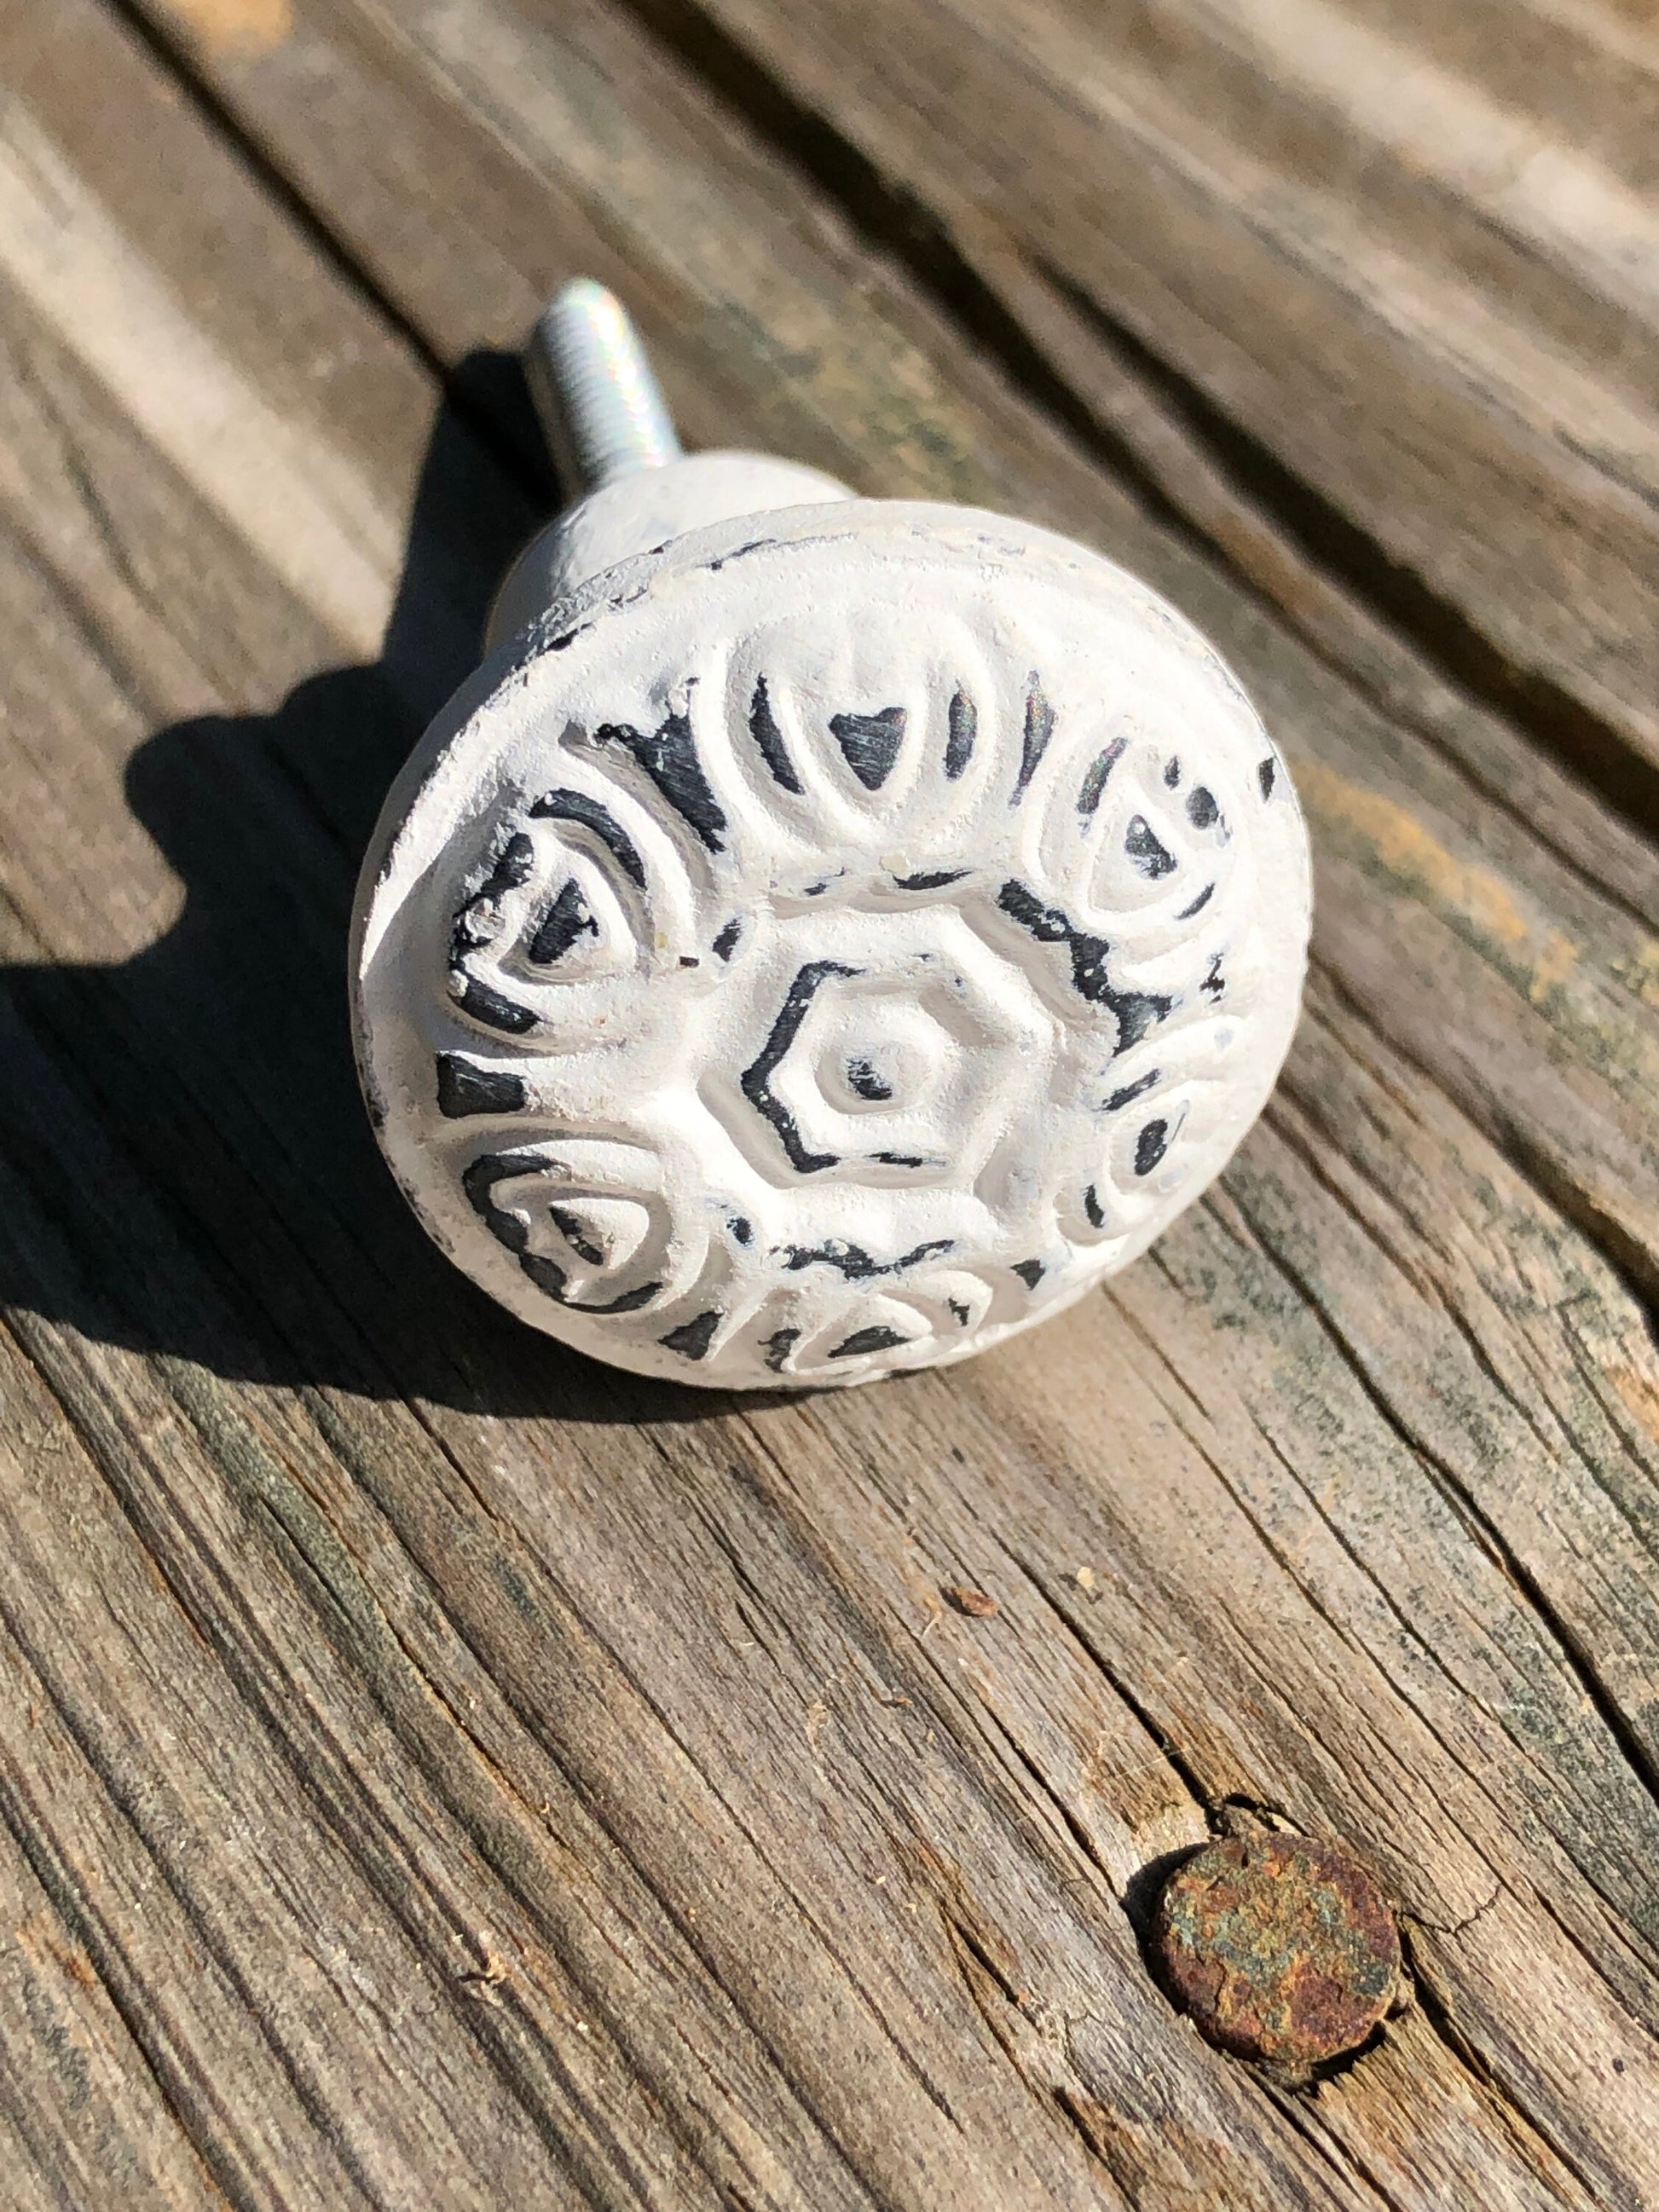 Cottage Chic Knobs / Drawer or Desk Knobs / Dresser Drawer Pulls / Distressed White Knobs / Shabby Chic Style / Cabinet Handles